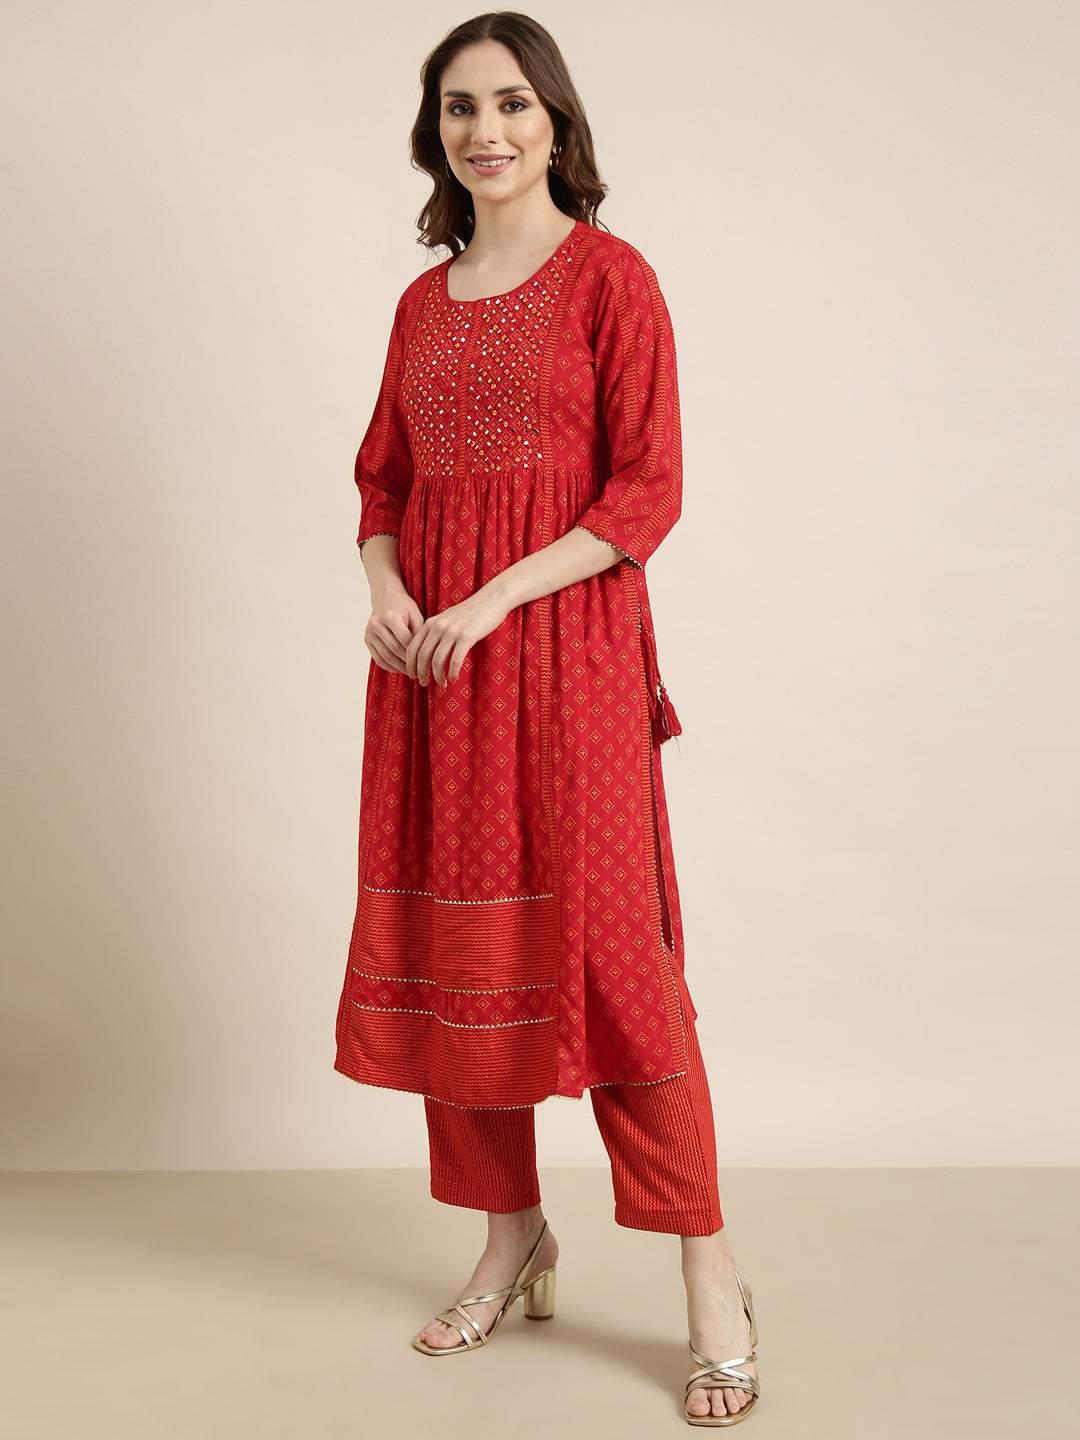 Women A-Line Red Geometric Kurta and Trousers Set Comes With Dupatta and Potli Bag